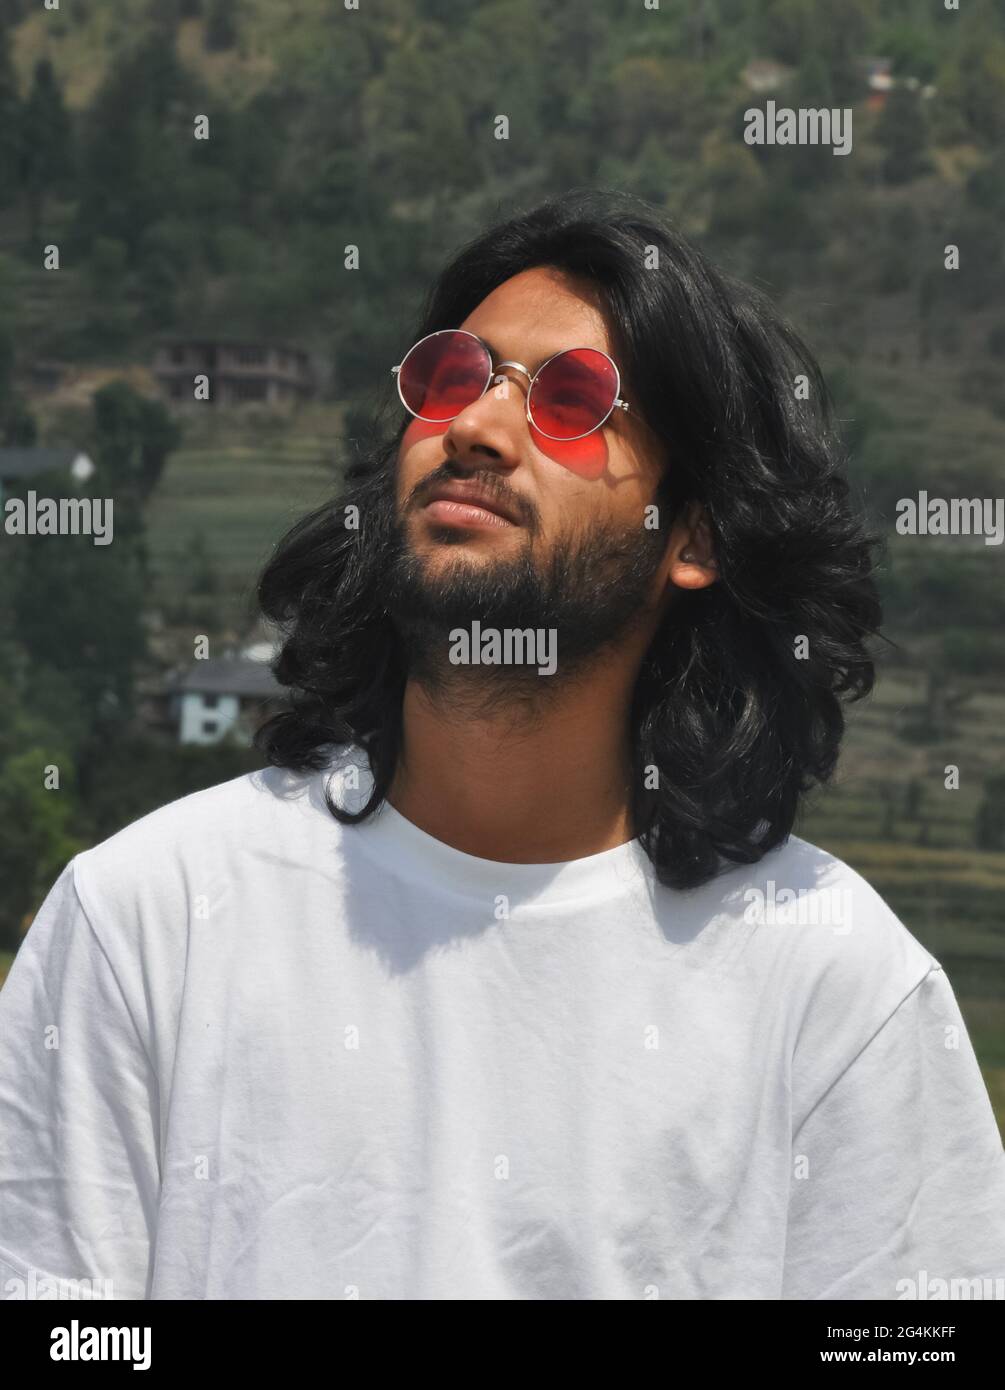 Portrait of a good looking long haired Indian young men wearing sunglass with looking up, A handsome bearded guy standing outside with wearing white t-shirt Stock Photo